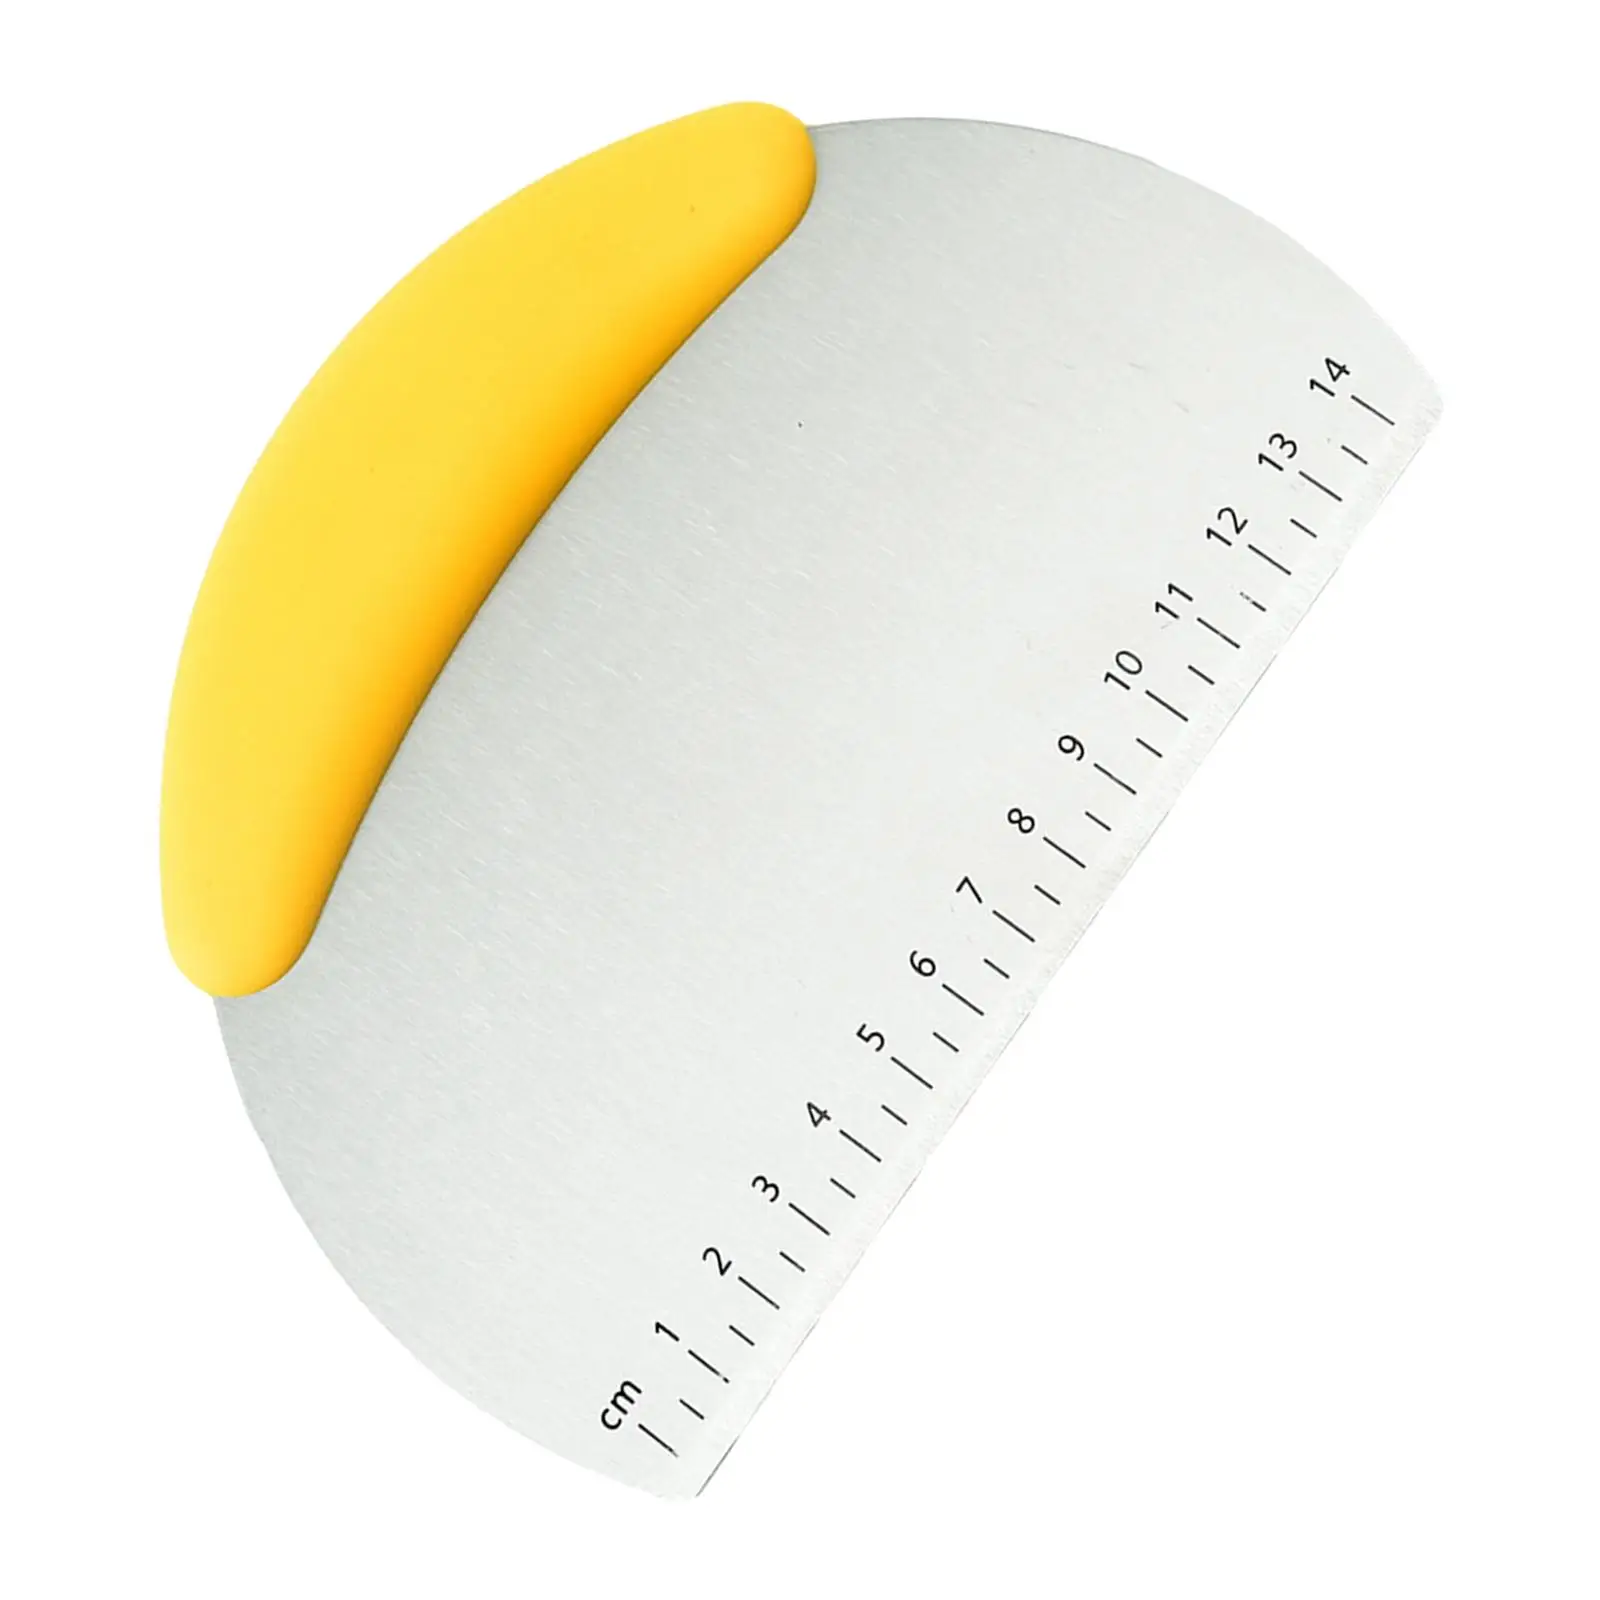 Pastry Chopper Kitchen Baking Tools with Measuring Markings for Restaurant